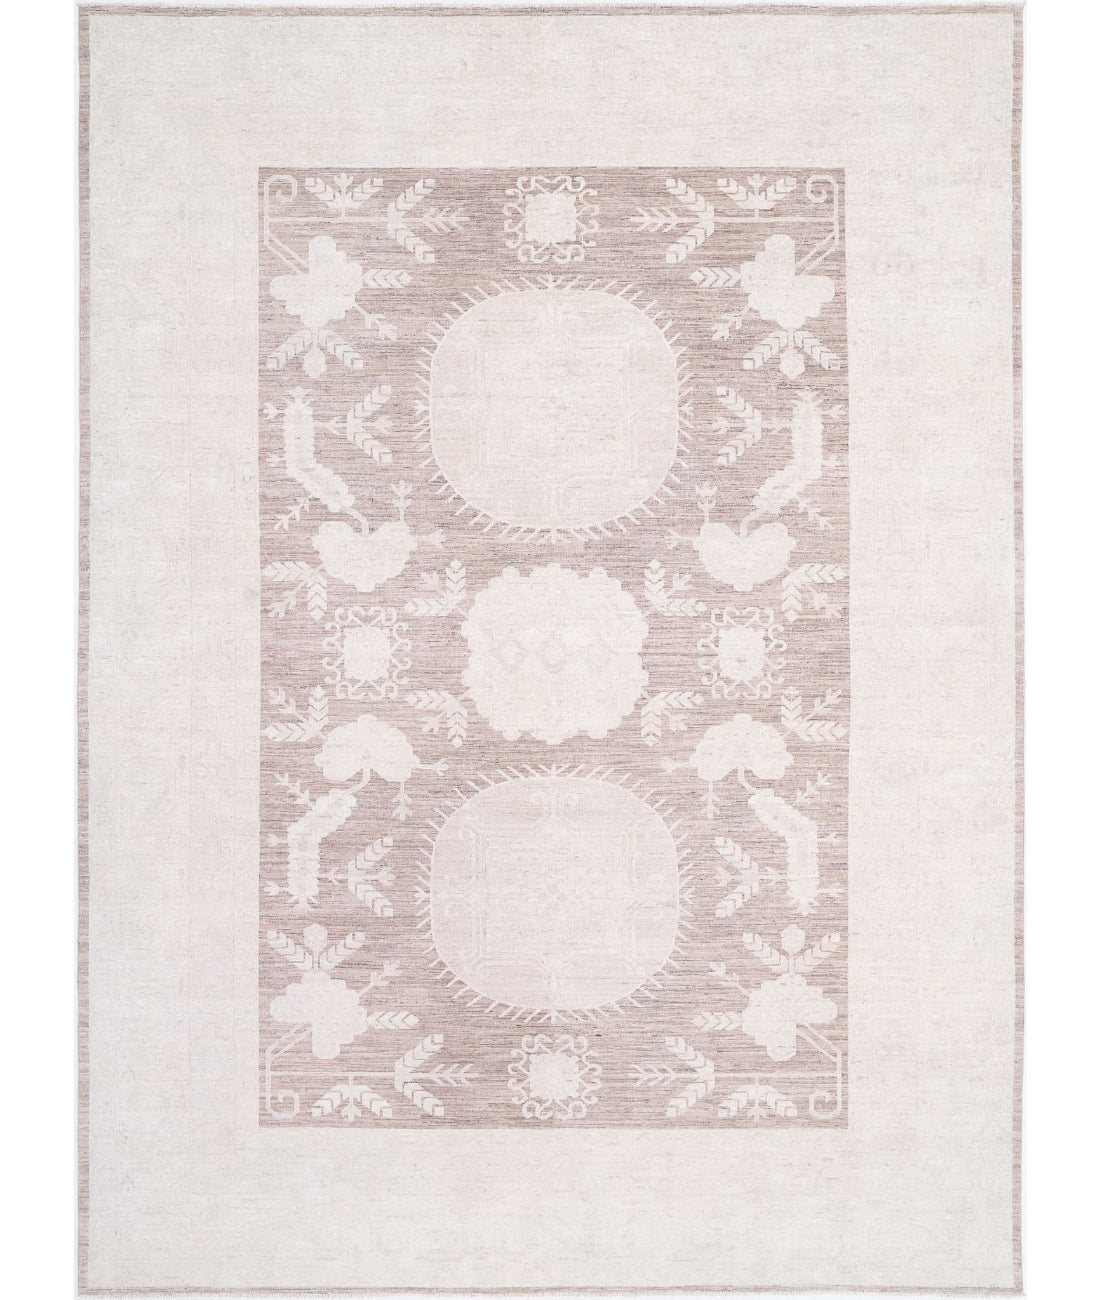 Hand Knotted Khotan Wool Rug - 9'11'' x 13'7'' 9'11'' x 13'7'' (298 X 408) / Brown / Ivory